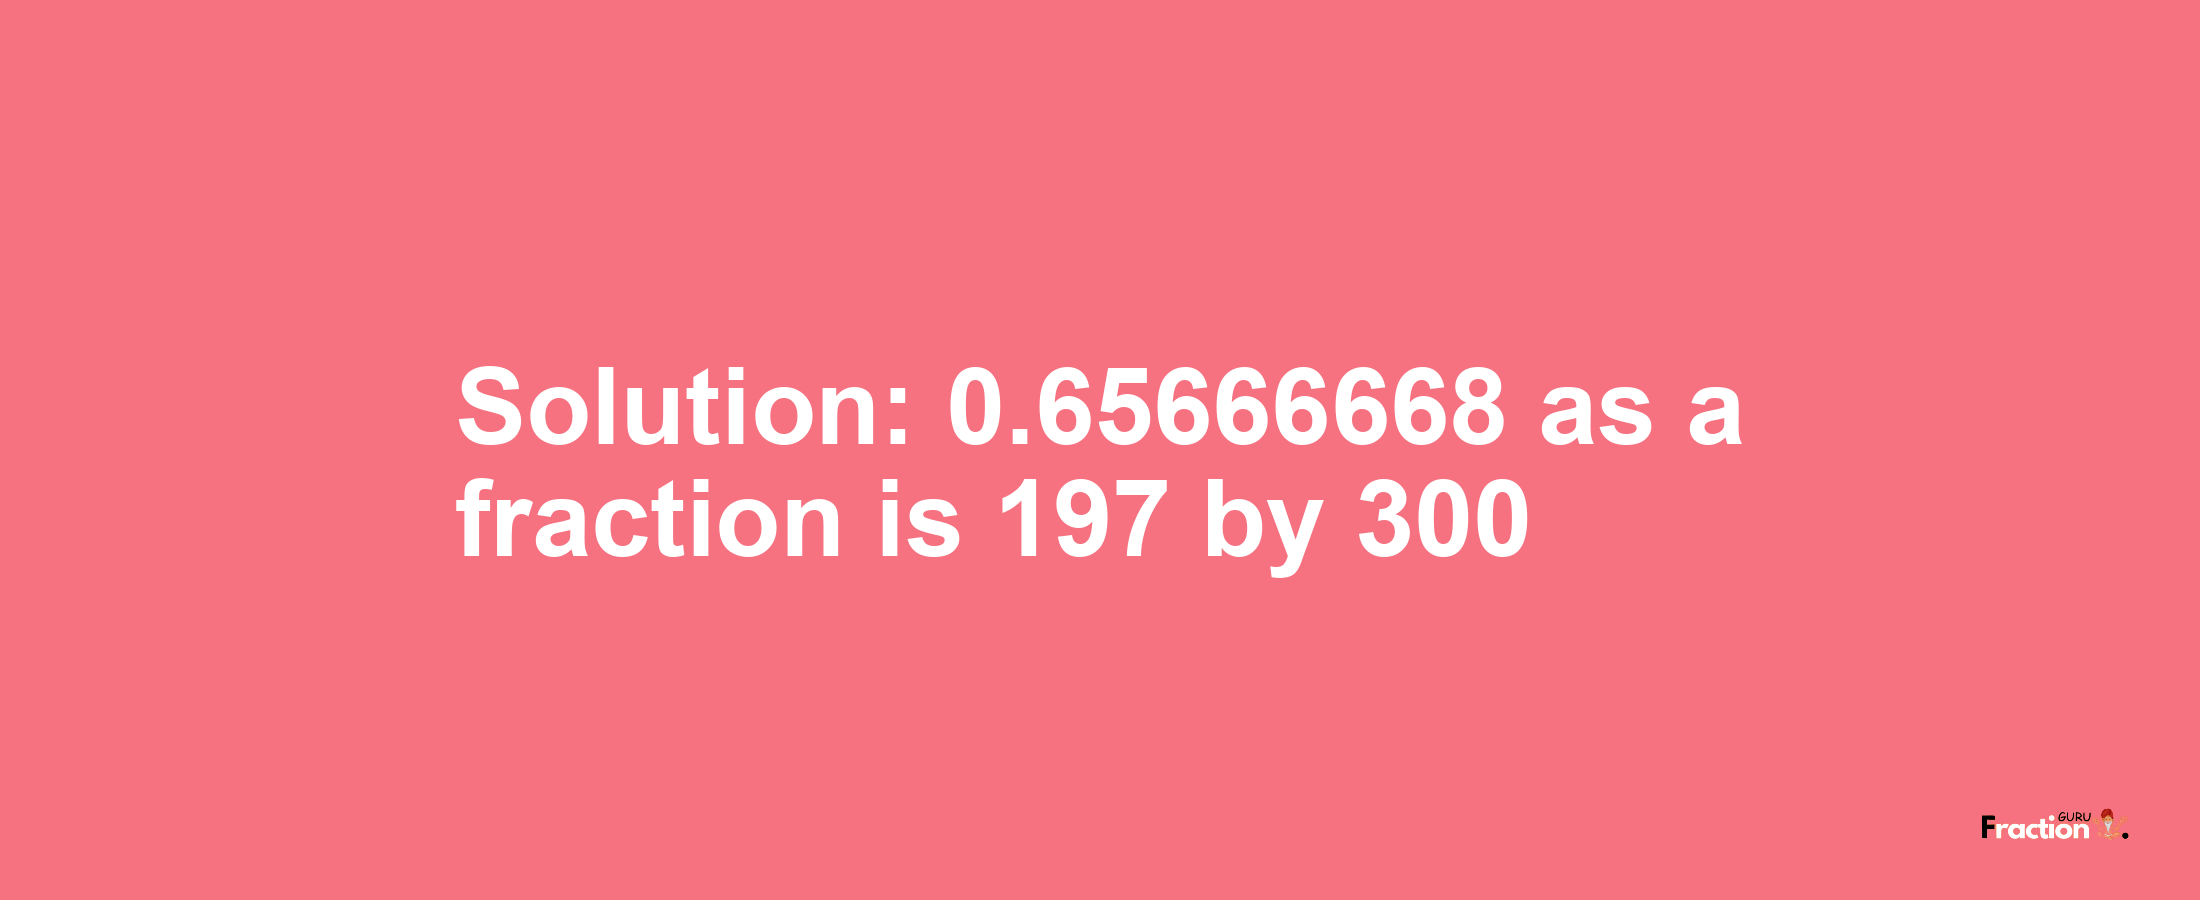 Solution:0.65666668 as a fraction is 197/300